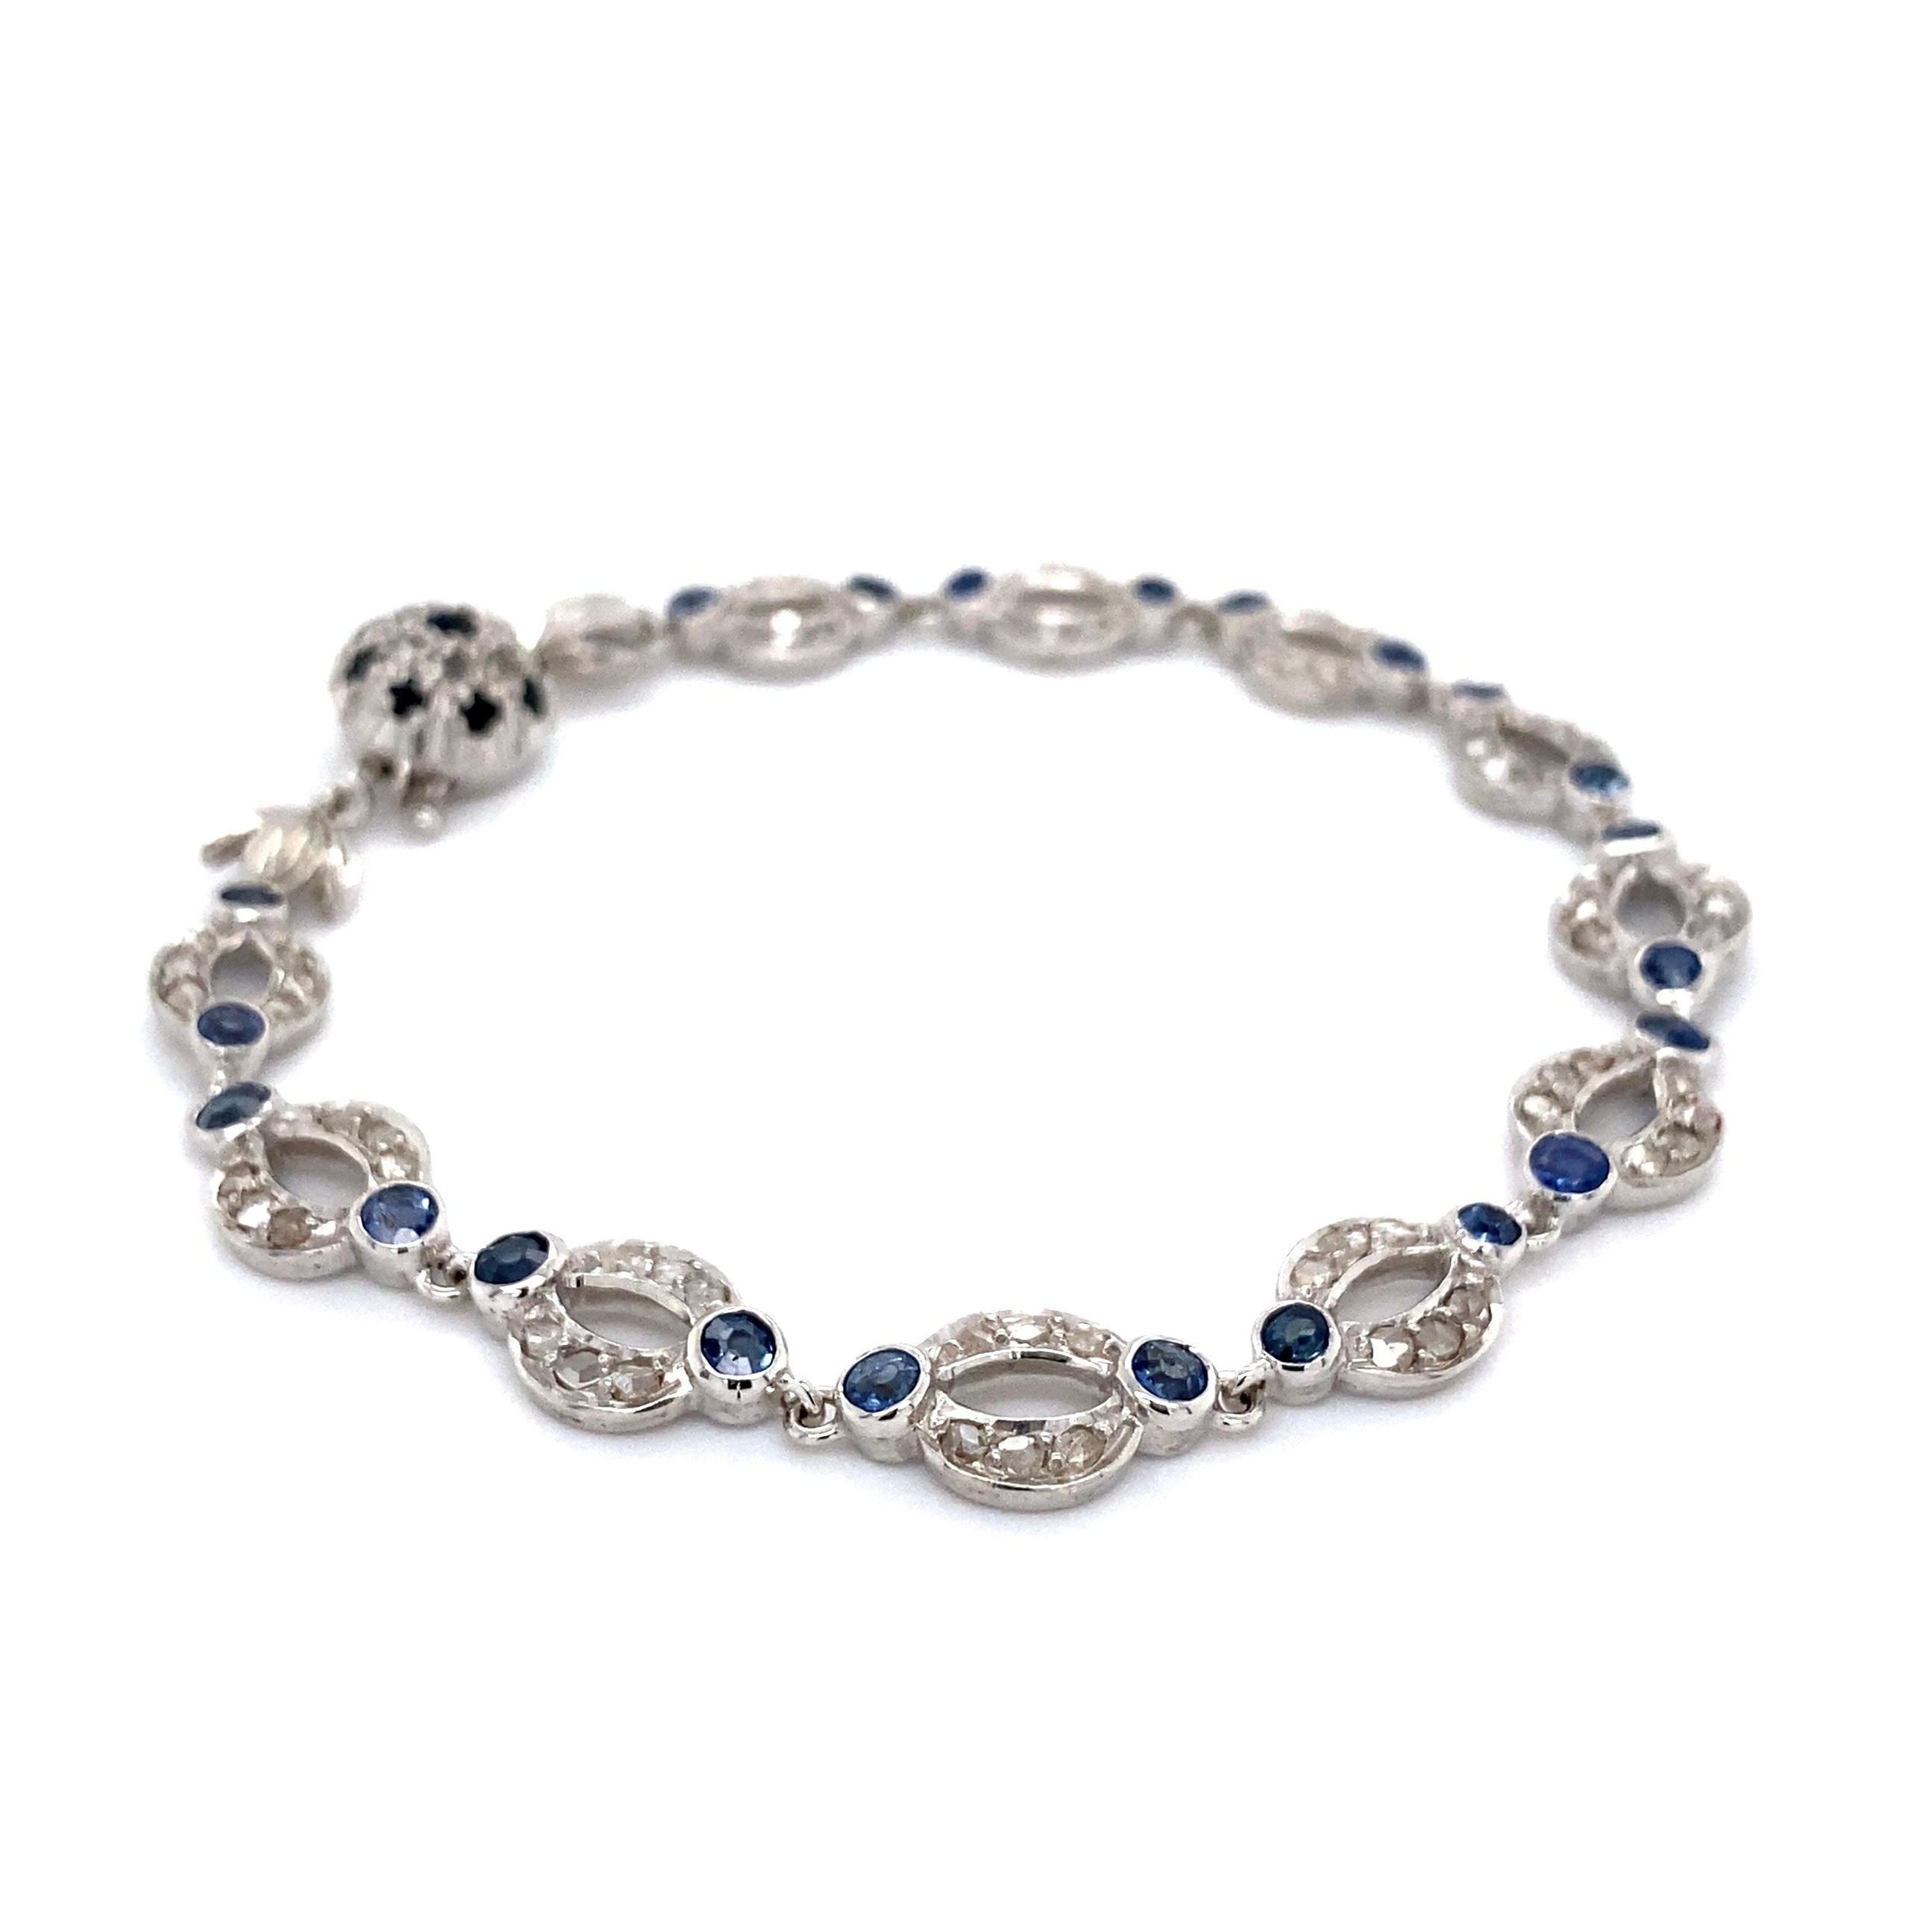 Simply Beautiful! Diamond set open Link Bracelet inter-spaced with Blue Sapphires. Hand set with 72 Rose cut Diamonds approx. 1.00tcw and 31 round Blue Sapphires approx. 3.25tcw. Bracelet measures approx. 7.75”long. Hand set and Hand crafted in